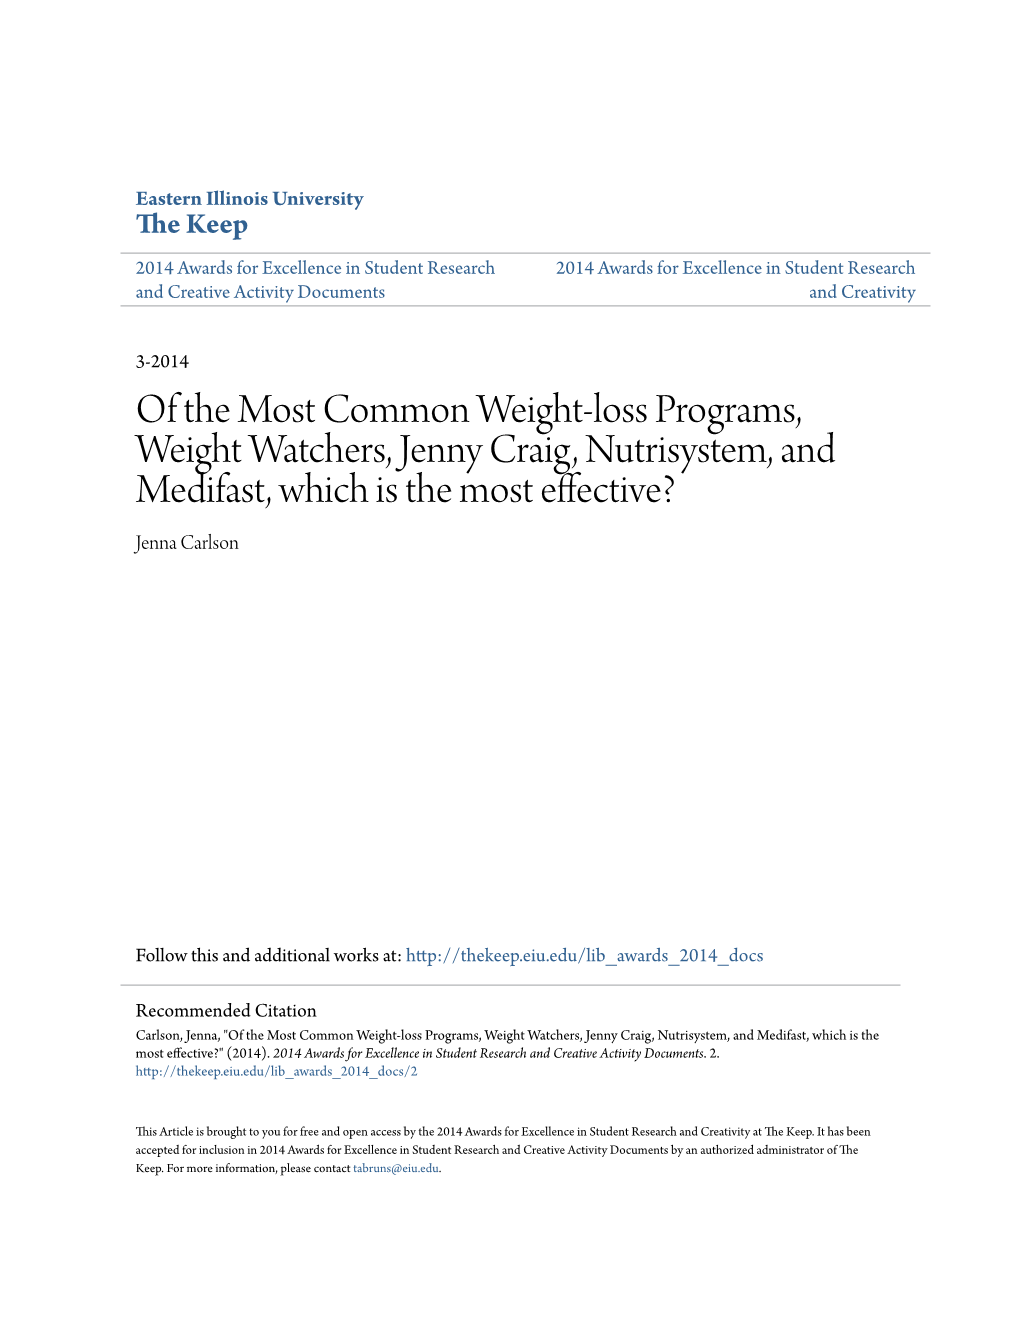 Of the Most Common Weight-Loss Programs, Weight Watchers, Jenny Craig, Nutrisystem, and Medifast, Which Is the Most Effective? Jenna Carlson